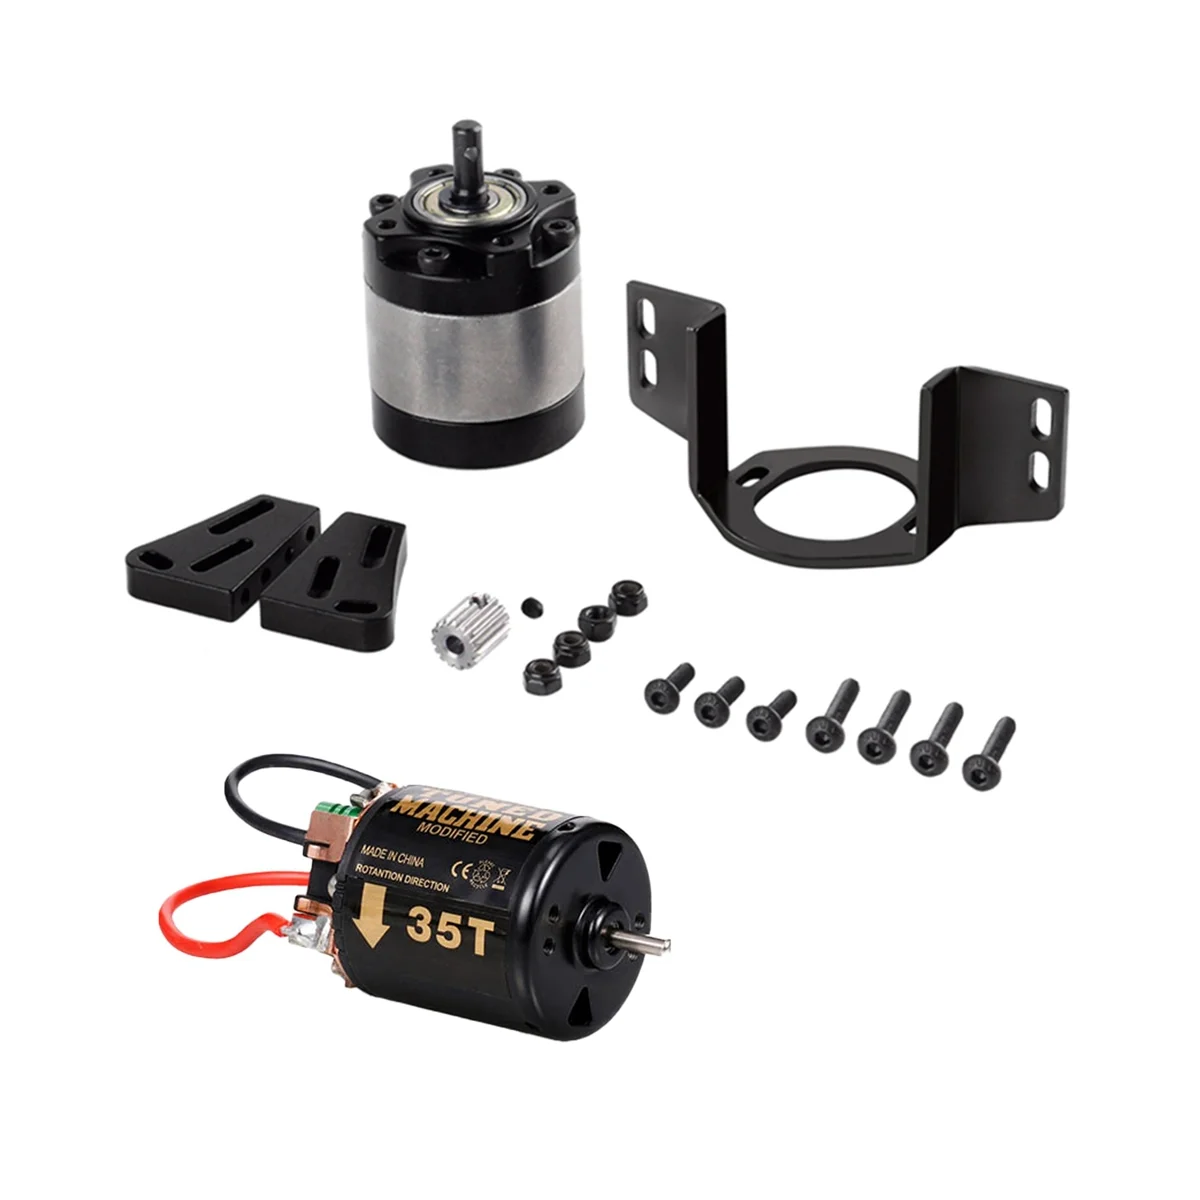 

External Carbon Brush 540 Brushed Motor 35T with 1:5 Reduction Gearbox for 1/14 Trailer 1/10 RC Car Crawler SCX10 TRX4